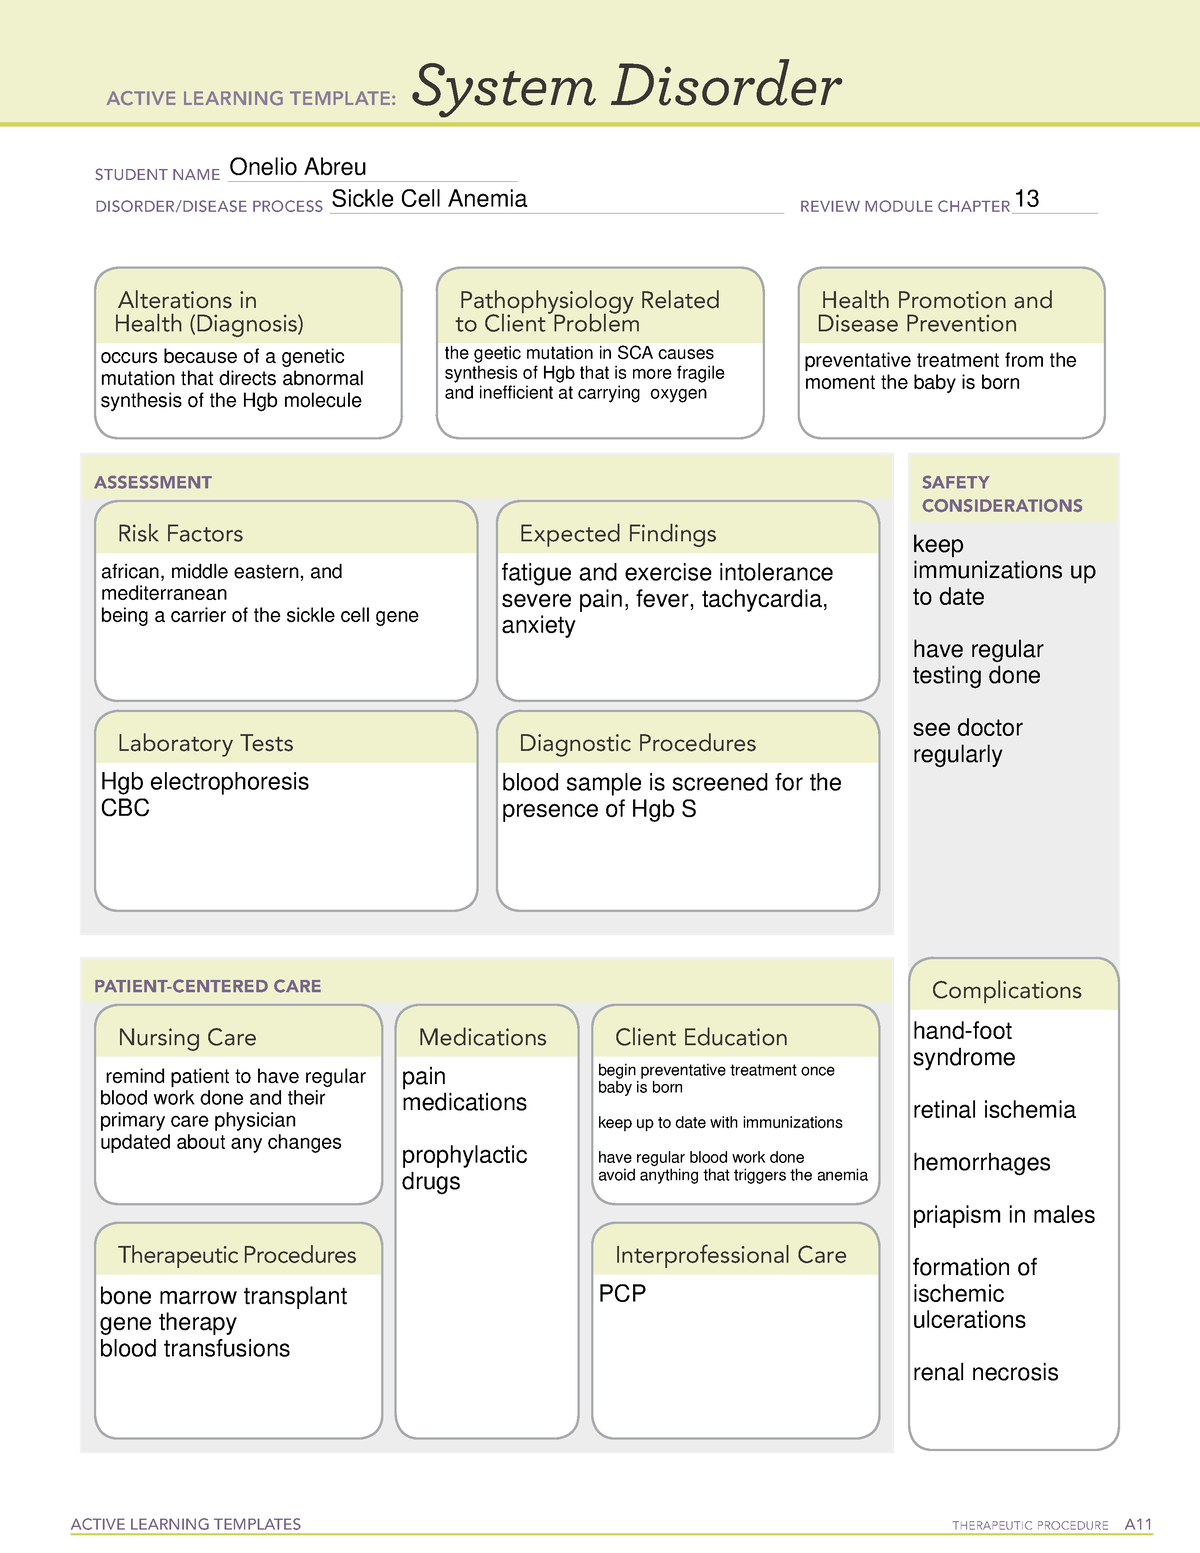 Sickle Cell Anemia Template - ACTIVE LEARNING TEMPLATES THERAPEUTIC ...